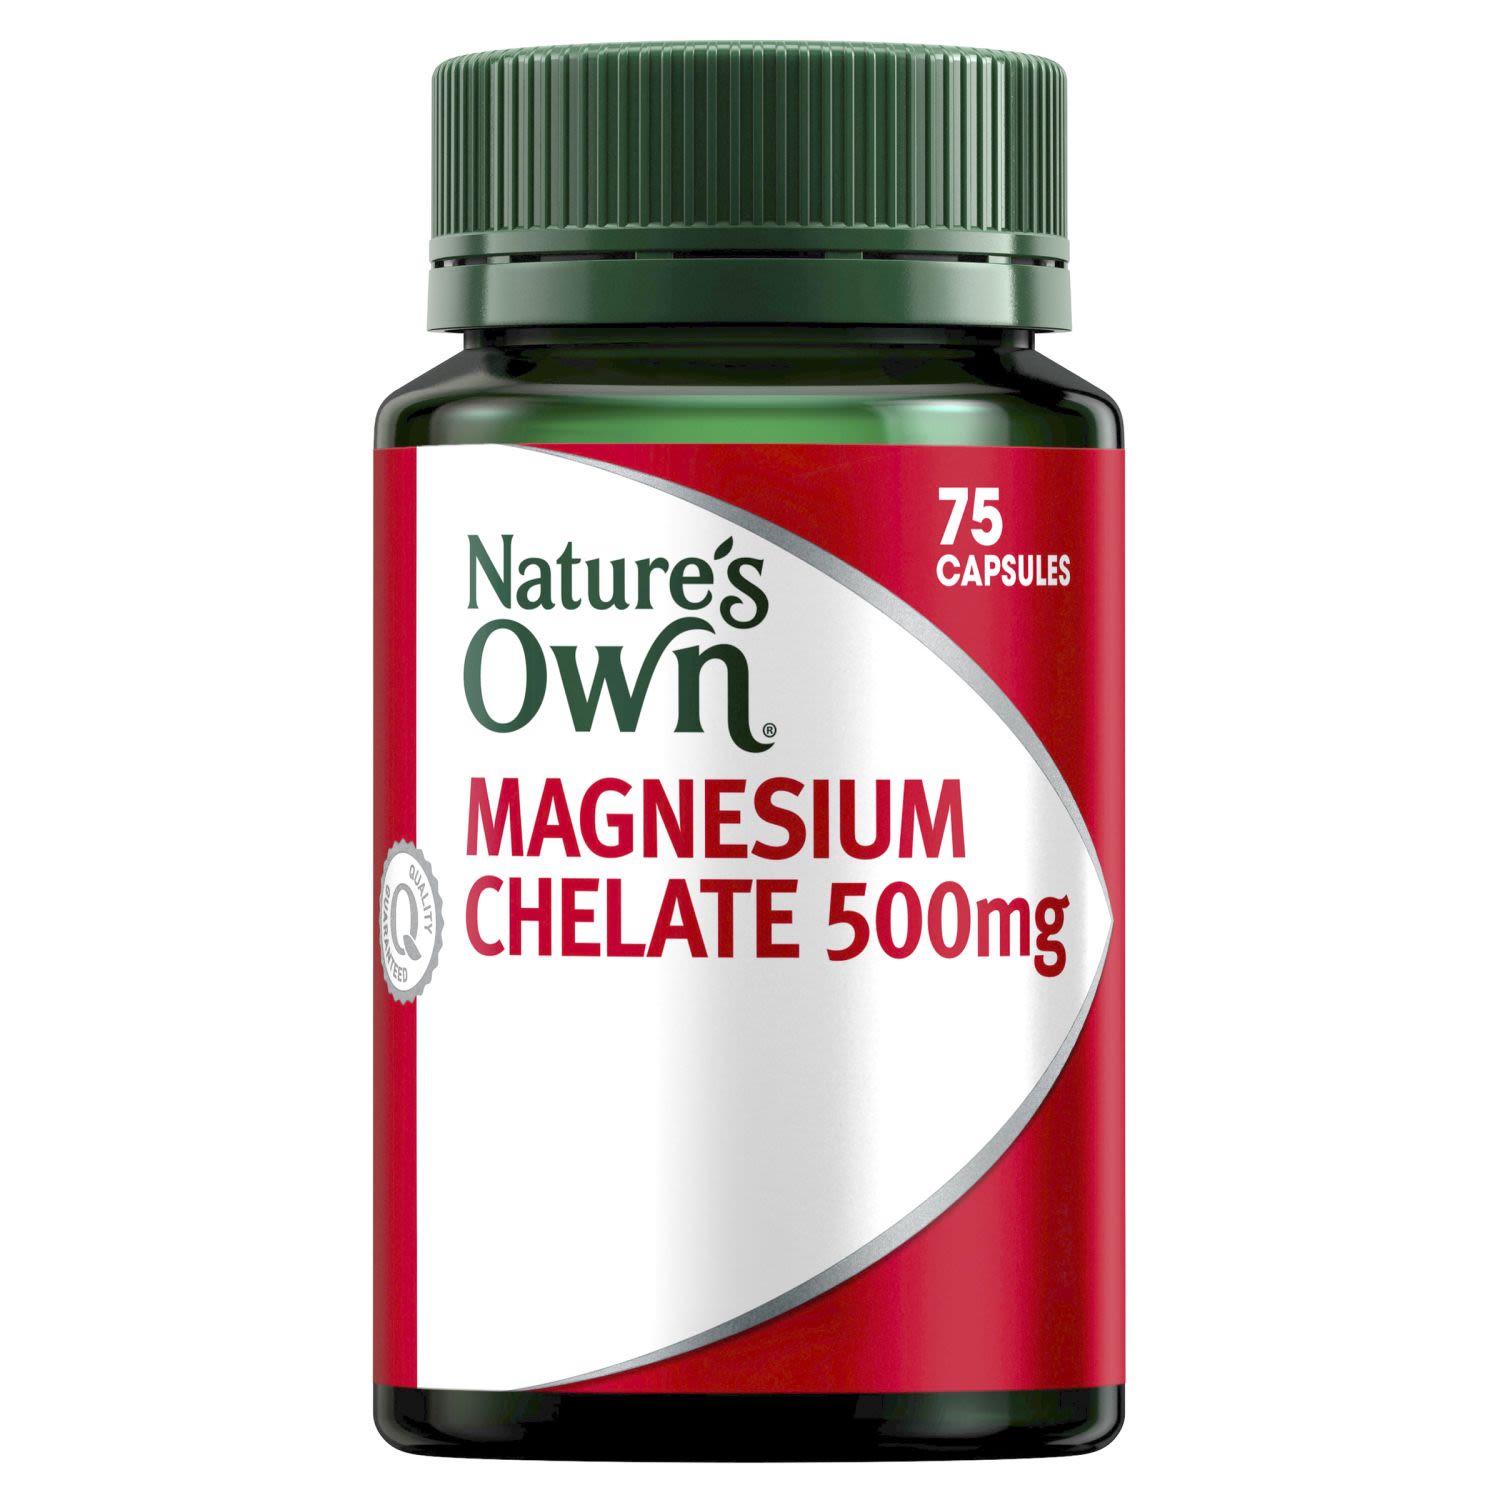 Nature's Own Magnesium Chelate, 75 Each